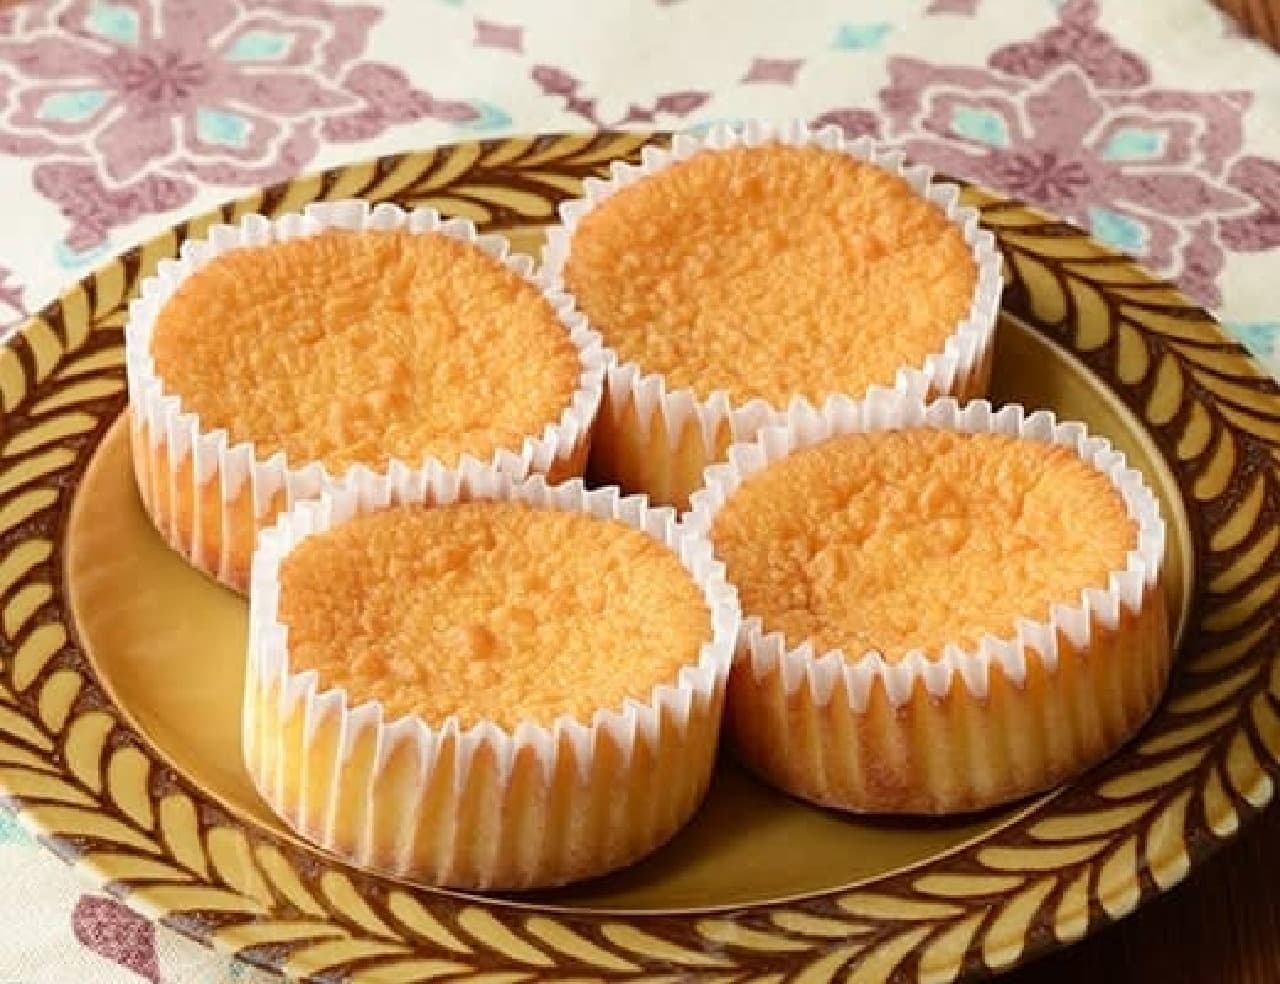 LAWSON "Moist Cheese Souffle Cake 4 pieces